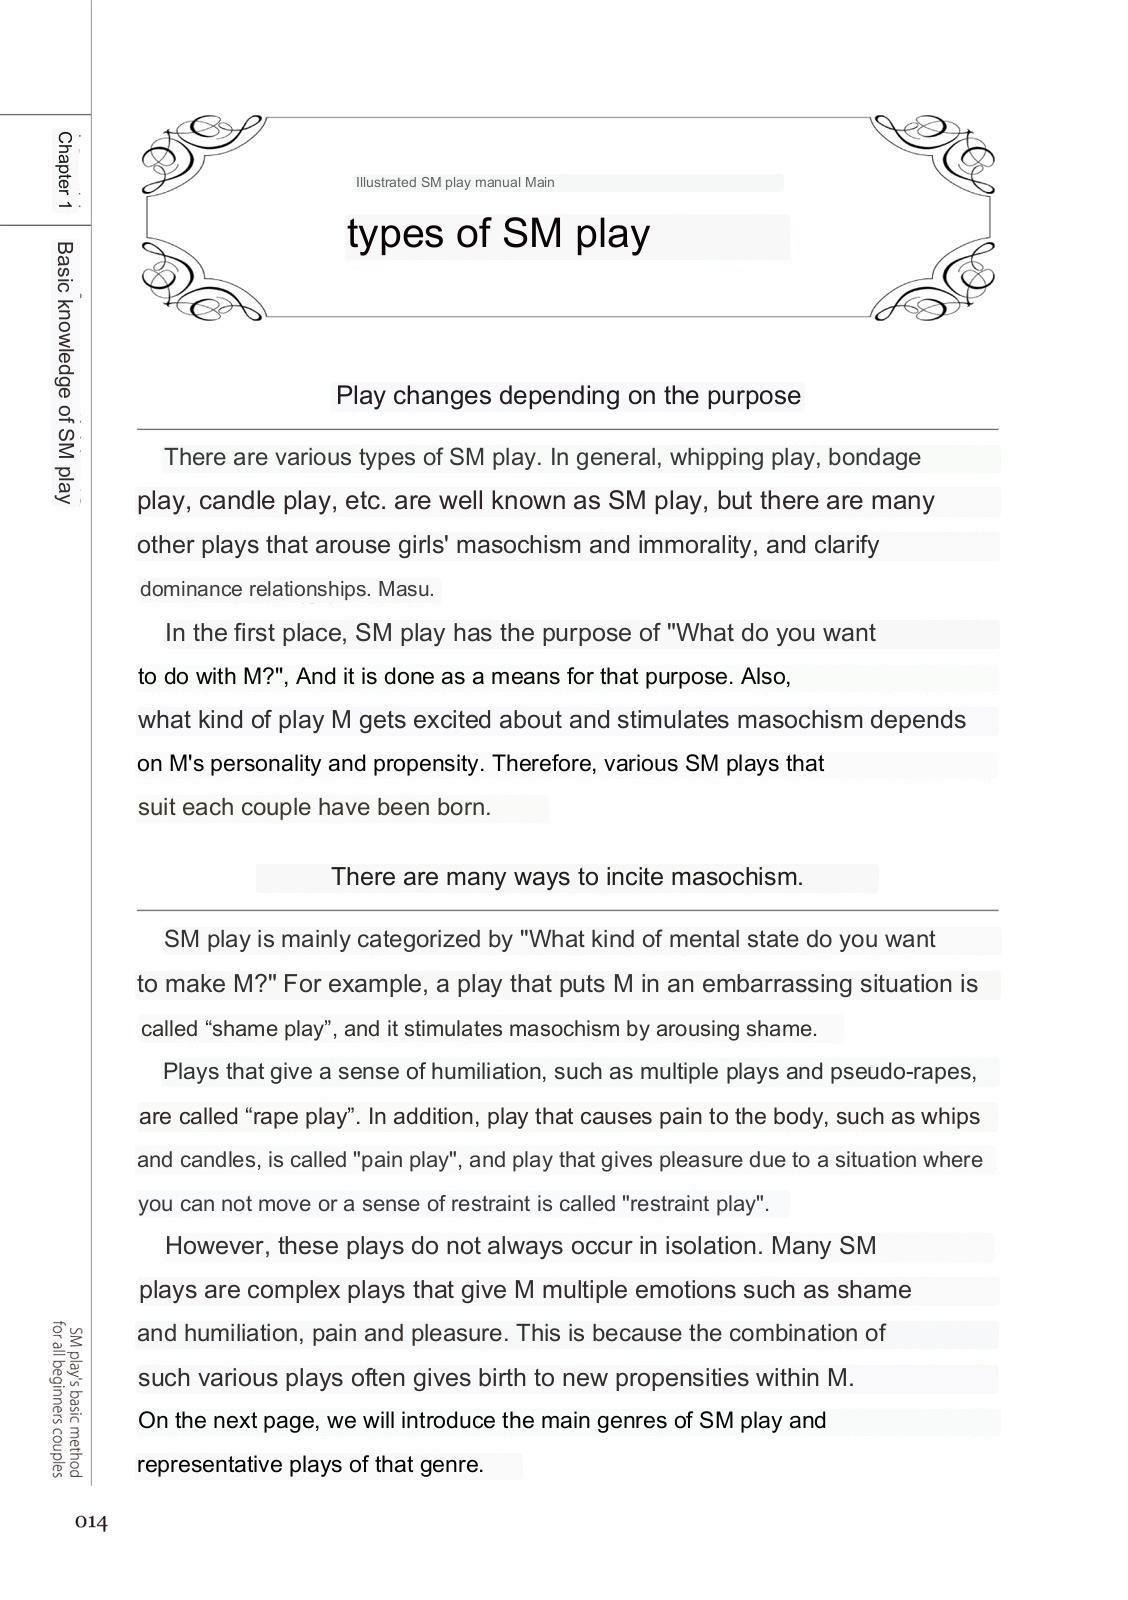 Matures SM play manual Little - Page 12